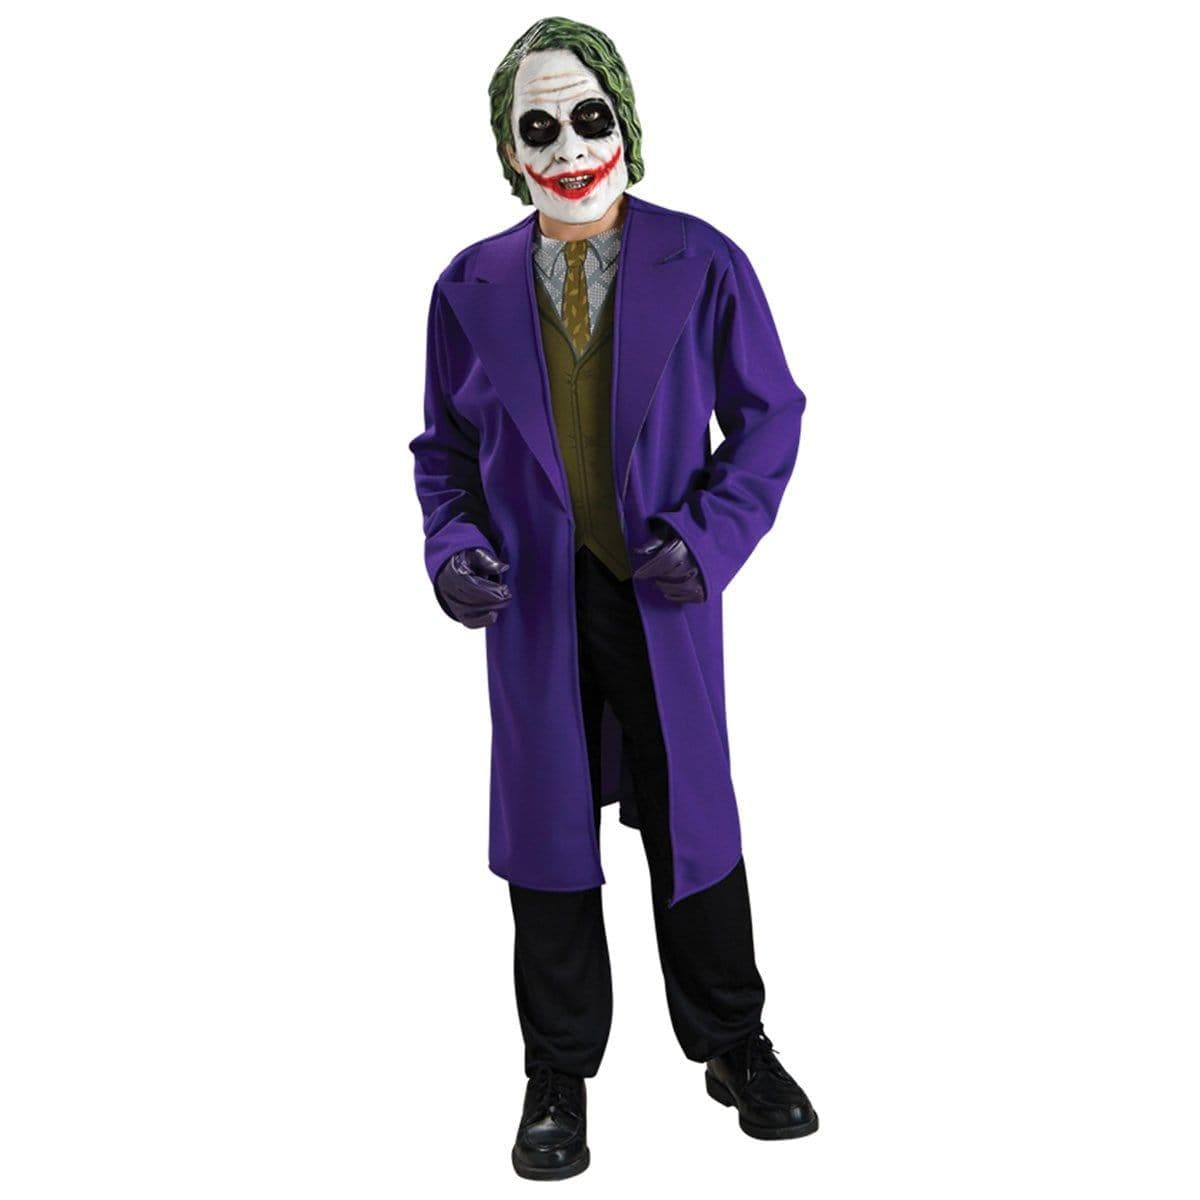 Buy Costumes The Joker Costume for Kids, Batman sold at Party Expert